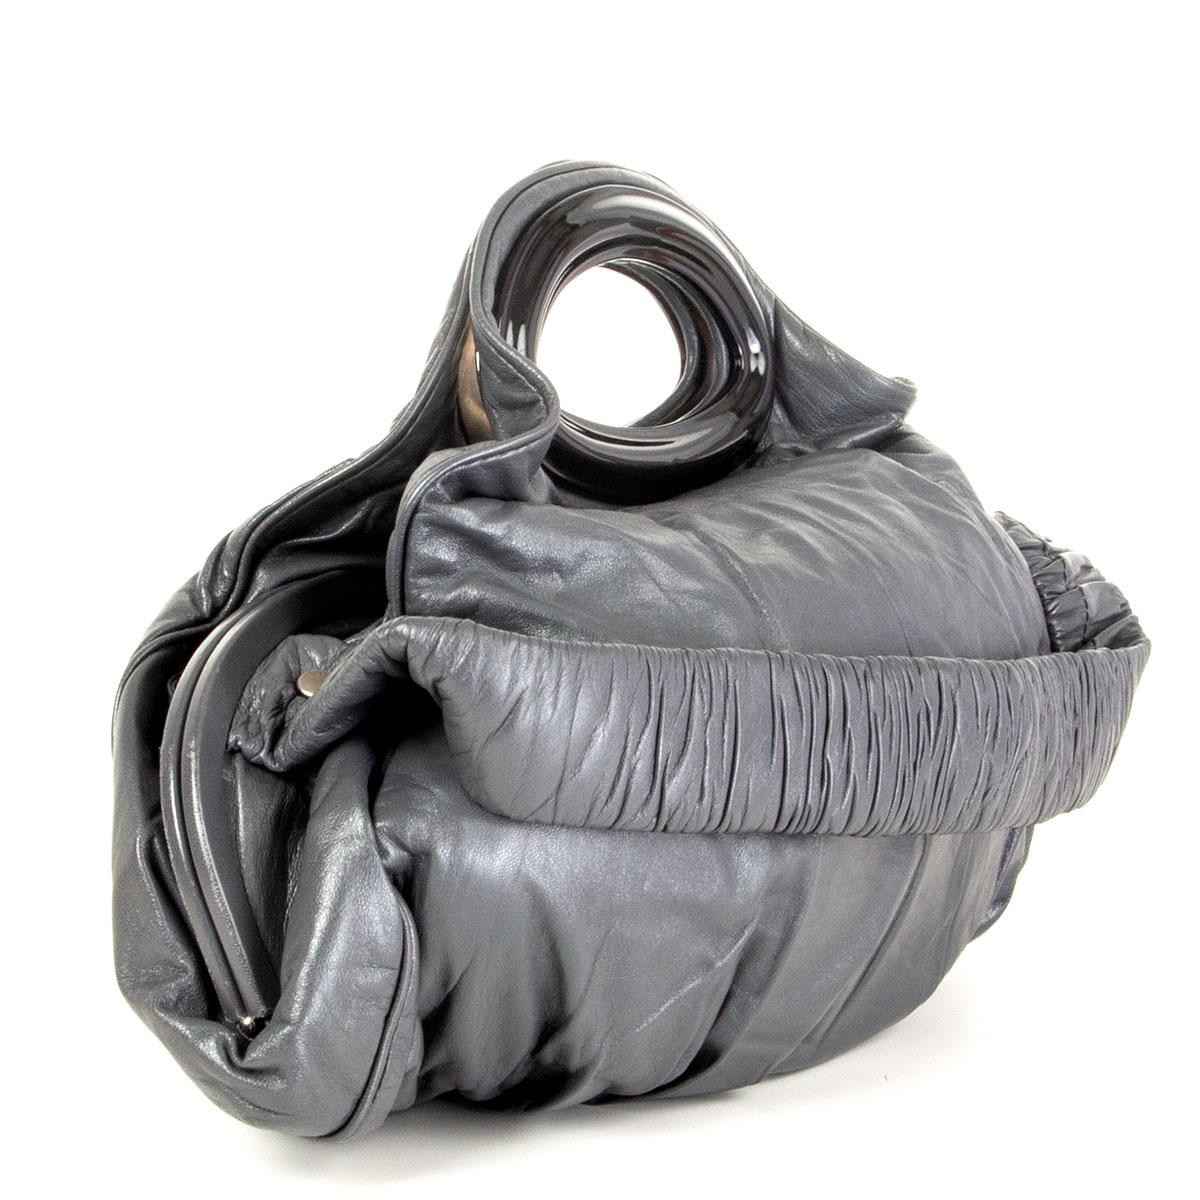 authentic Marni shoulder bag in iron grey smooth nappa leather with black acetate handle and pleated shoulder strap. Lined in grey nylon and divided in three compartments with one zipper against the back and one open pocket against the front. Has